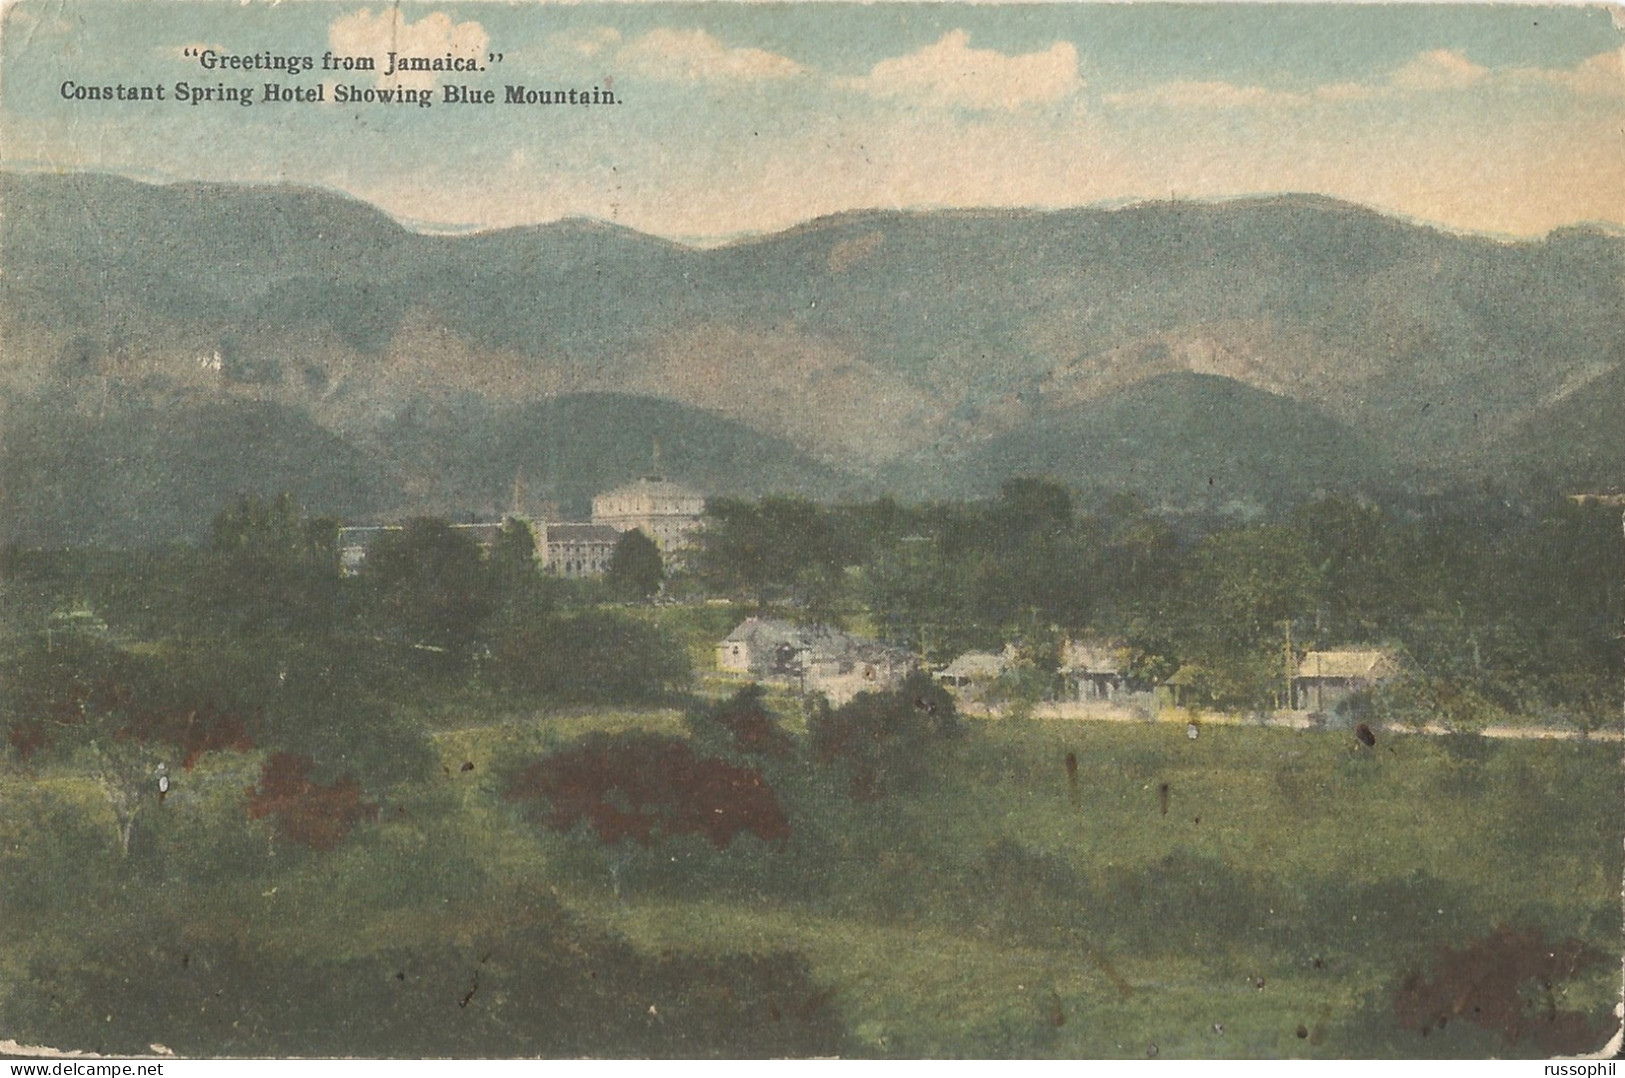 JAMAICA - CONSTANT SPRING HOTEL SHOWING BLUE MOUNTAINS - GREETINGS FROM JAMAICA - PUB. DUPERLY - 1927 - Jamaica